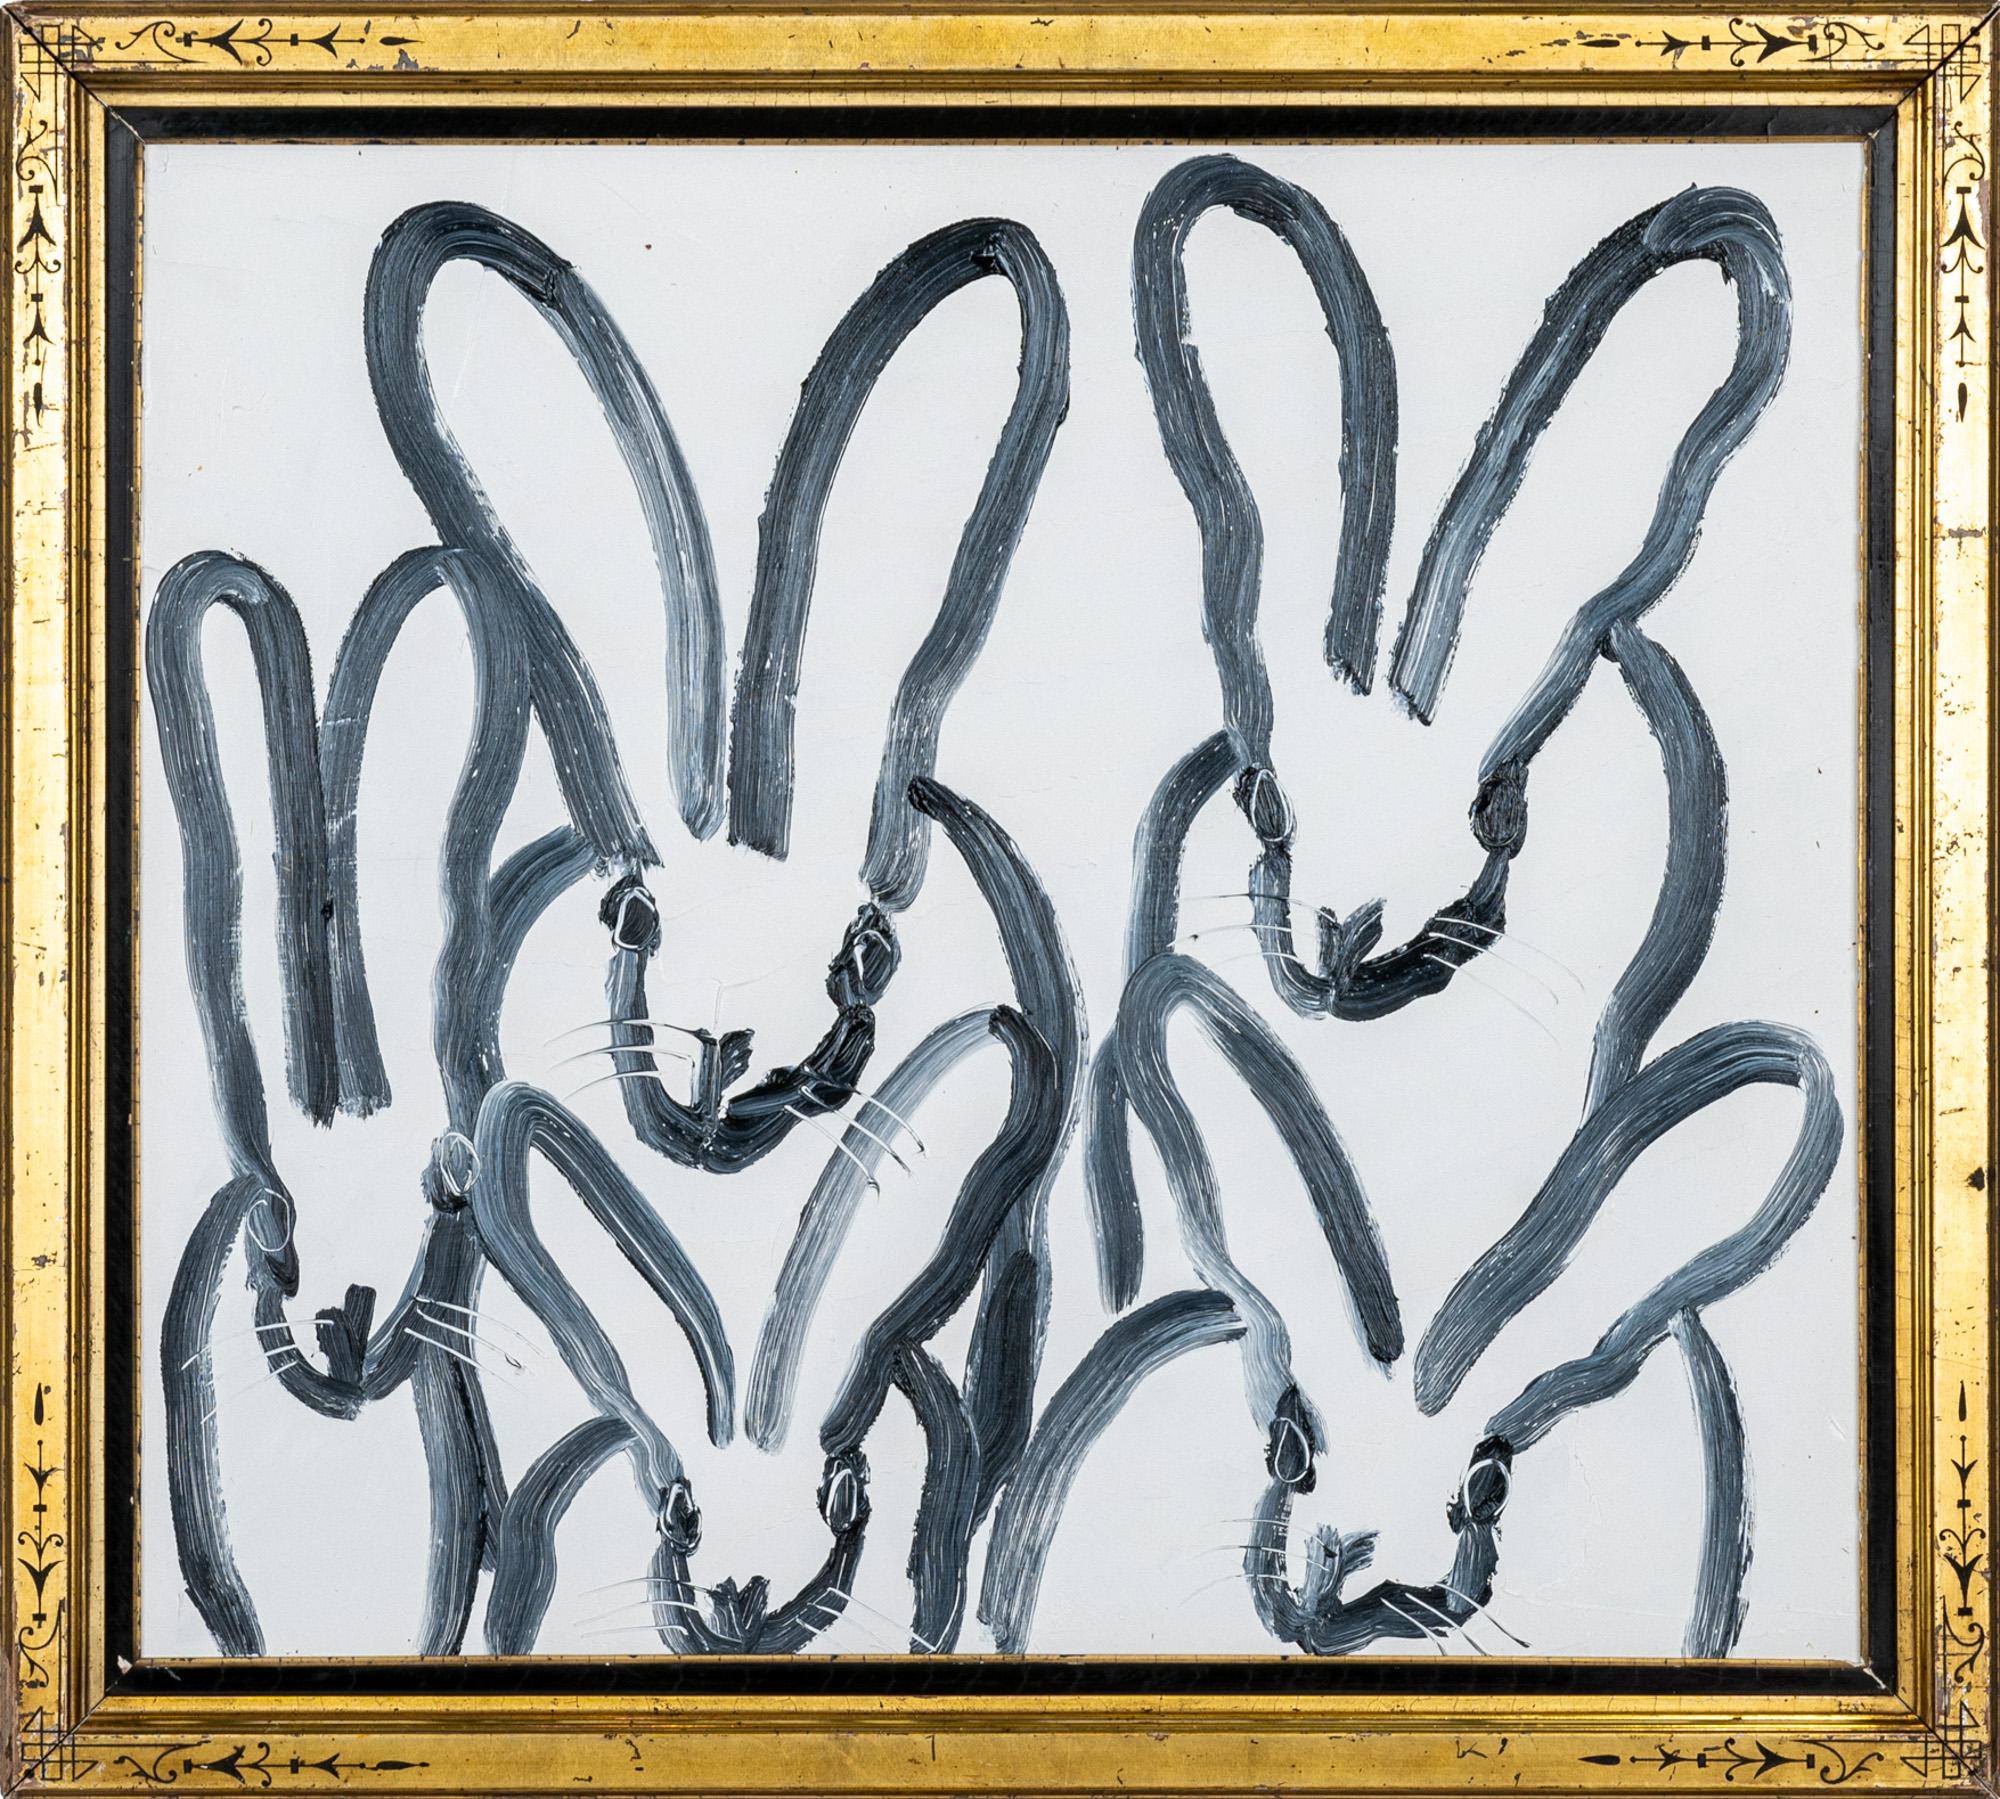 "Hutch 5" is a framed oil painting on wood by Hunt Slonem, depicting 5 rabbits in painterly contour lines set against a simple white background. 

This piece is finished in an antique frame, which has been hand-selected by the artist for this